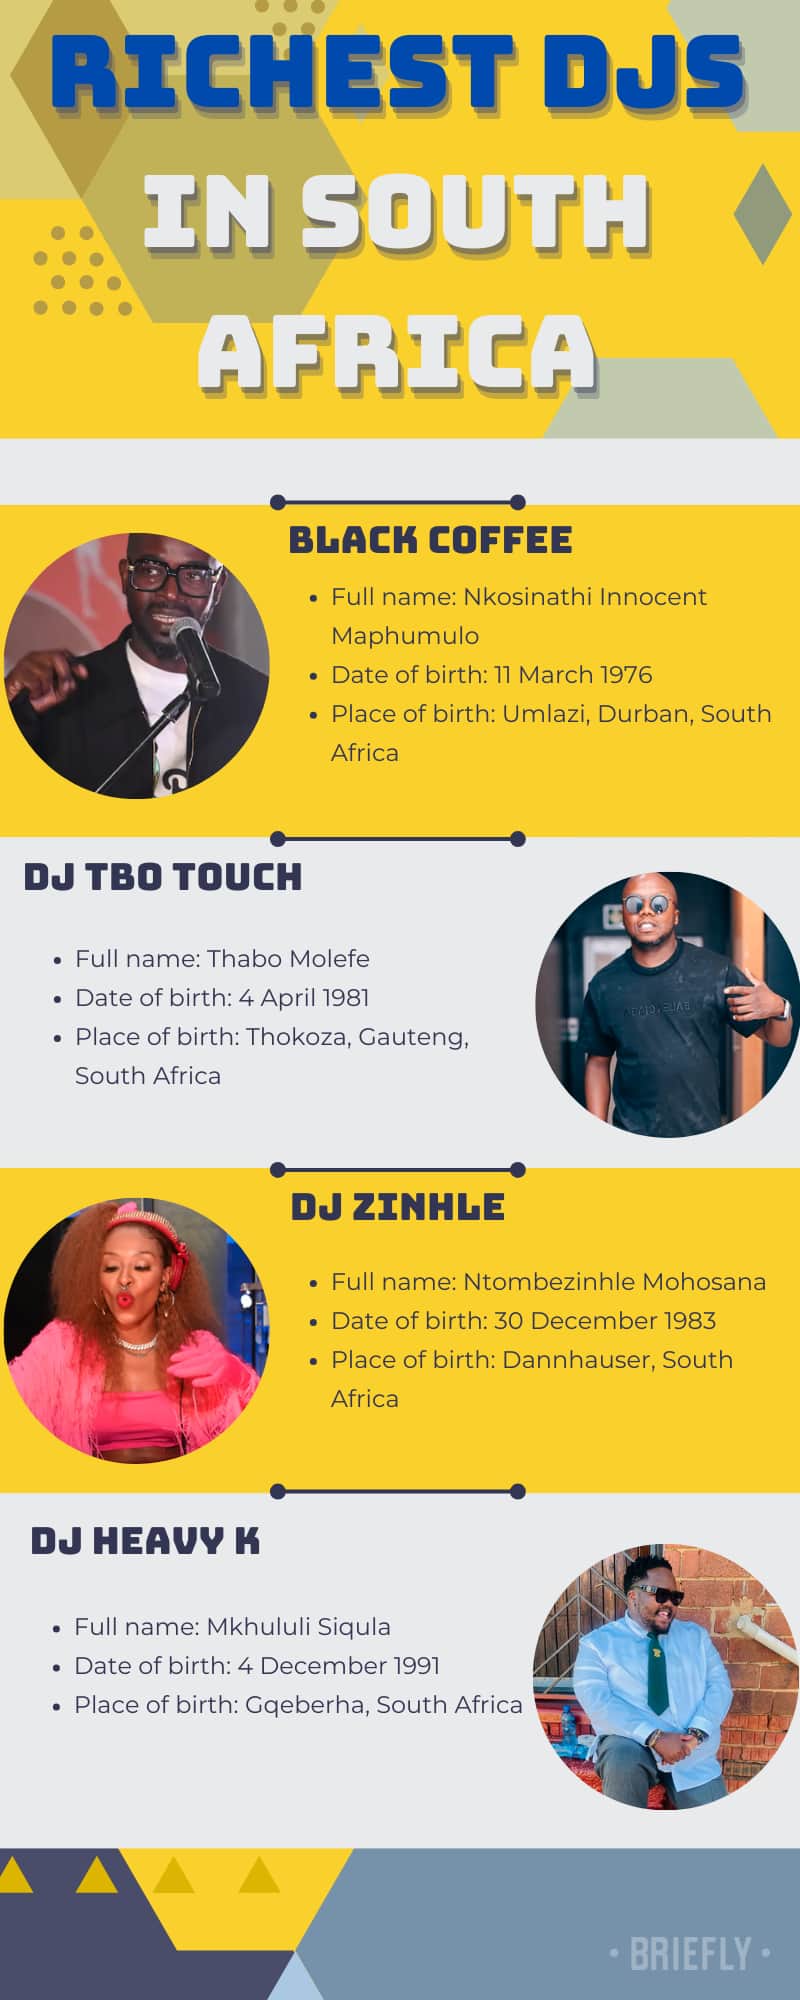 Richest DJs in South Africa and their net worth